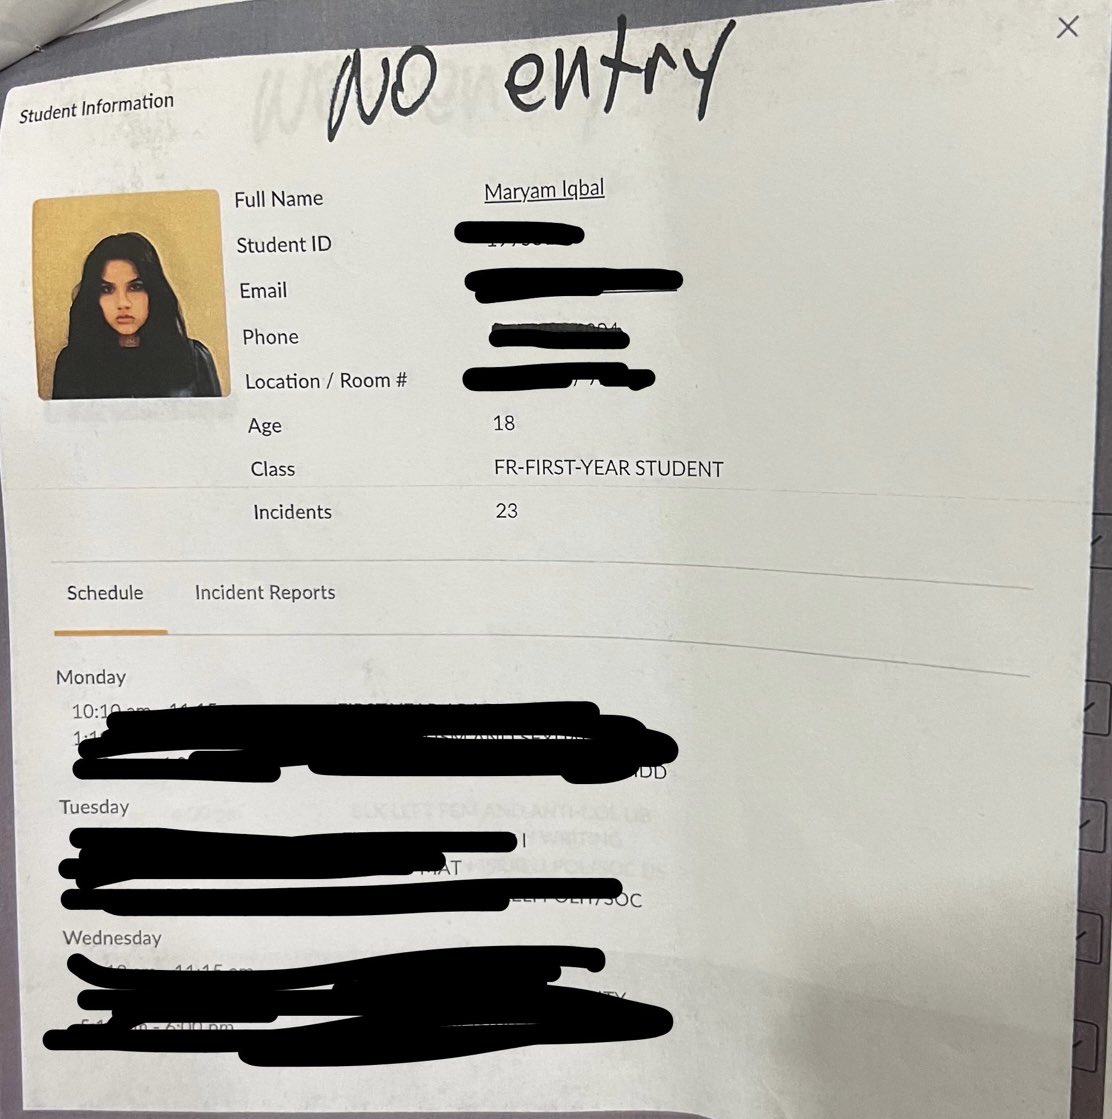 Barnard College/Columbia University security release the photos of Isra Hirsi, daughter of antisemitic Congresswoman Ilhan Omar, and Maryam Iqbal titled “NO ENTRY” after both women have been suspended due to their radical activities on campus.